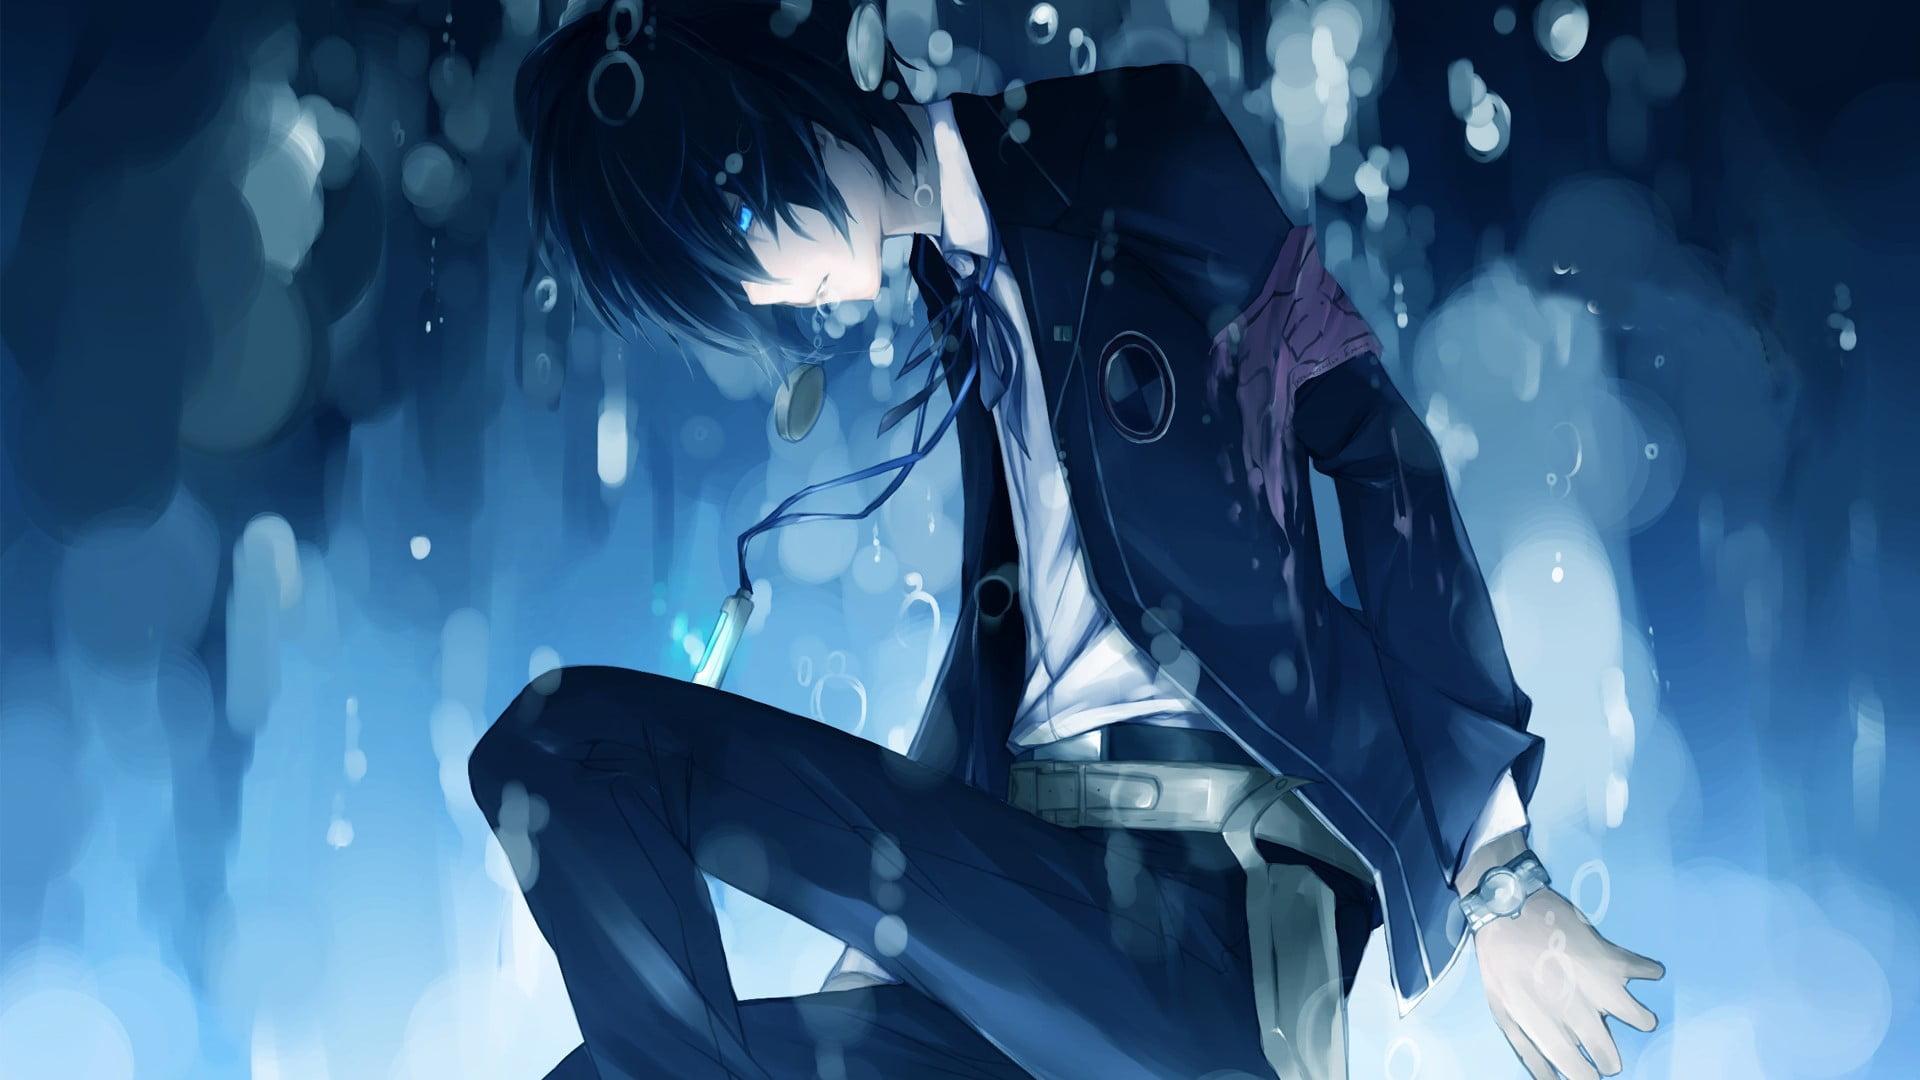 Anime Boy With Black Hair Wallpapers